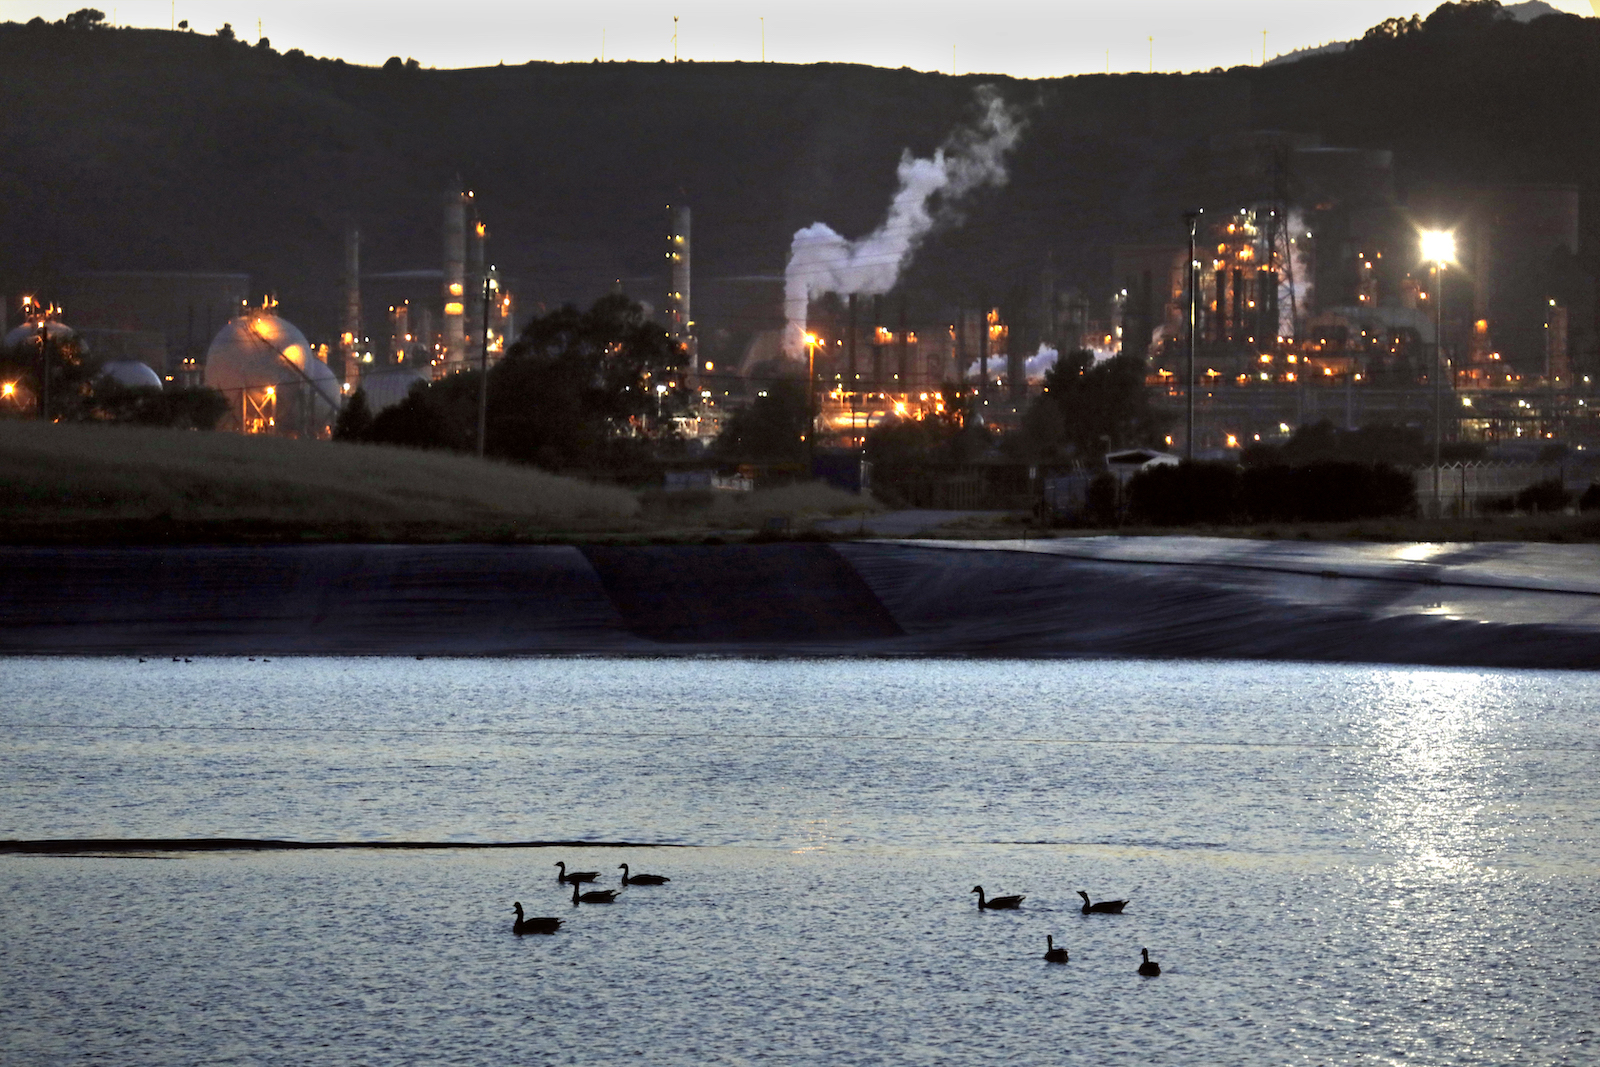 The Chevron facility in Richmond, California is one of more than 400 toxic facilities at risk of major flooding events by 2100.